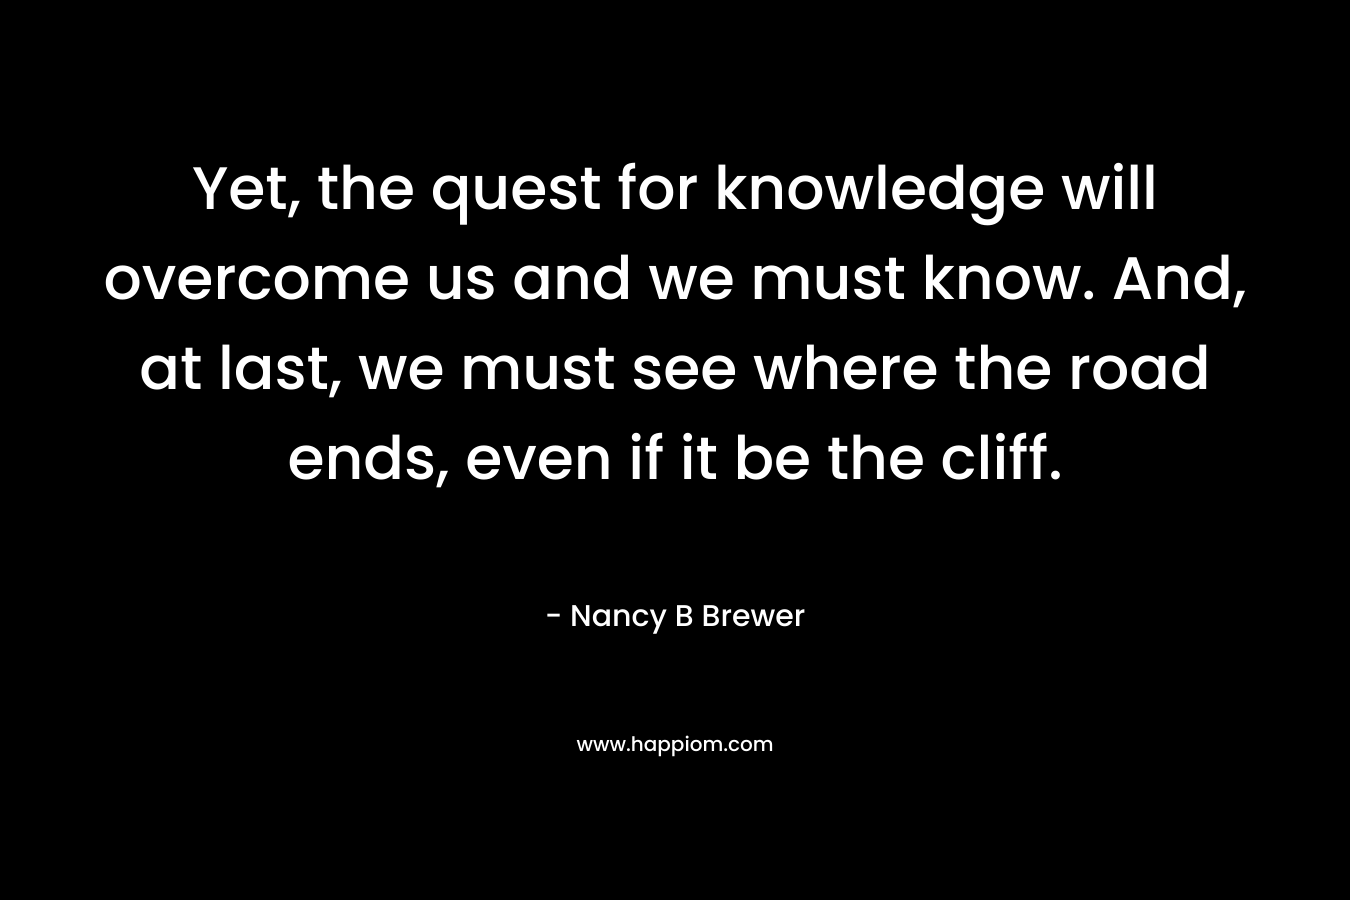 Yet, the quest for knowledge will overcome us and we must know. And, at last, we must see where the road ends, even if it be the cliff. – Nancy B Brewer